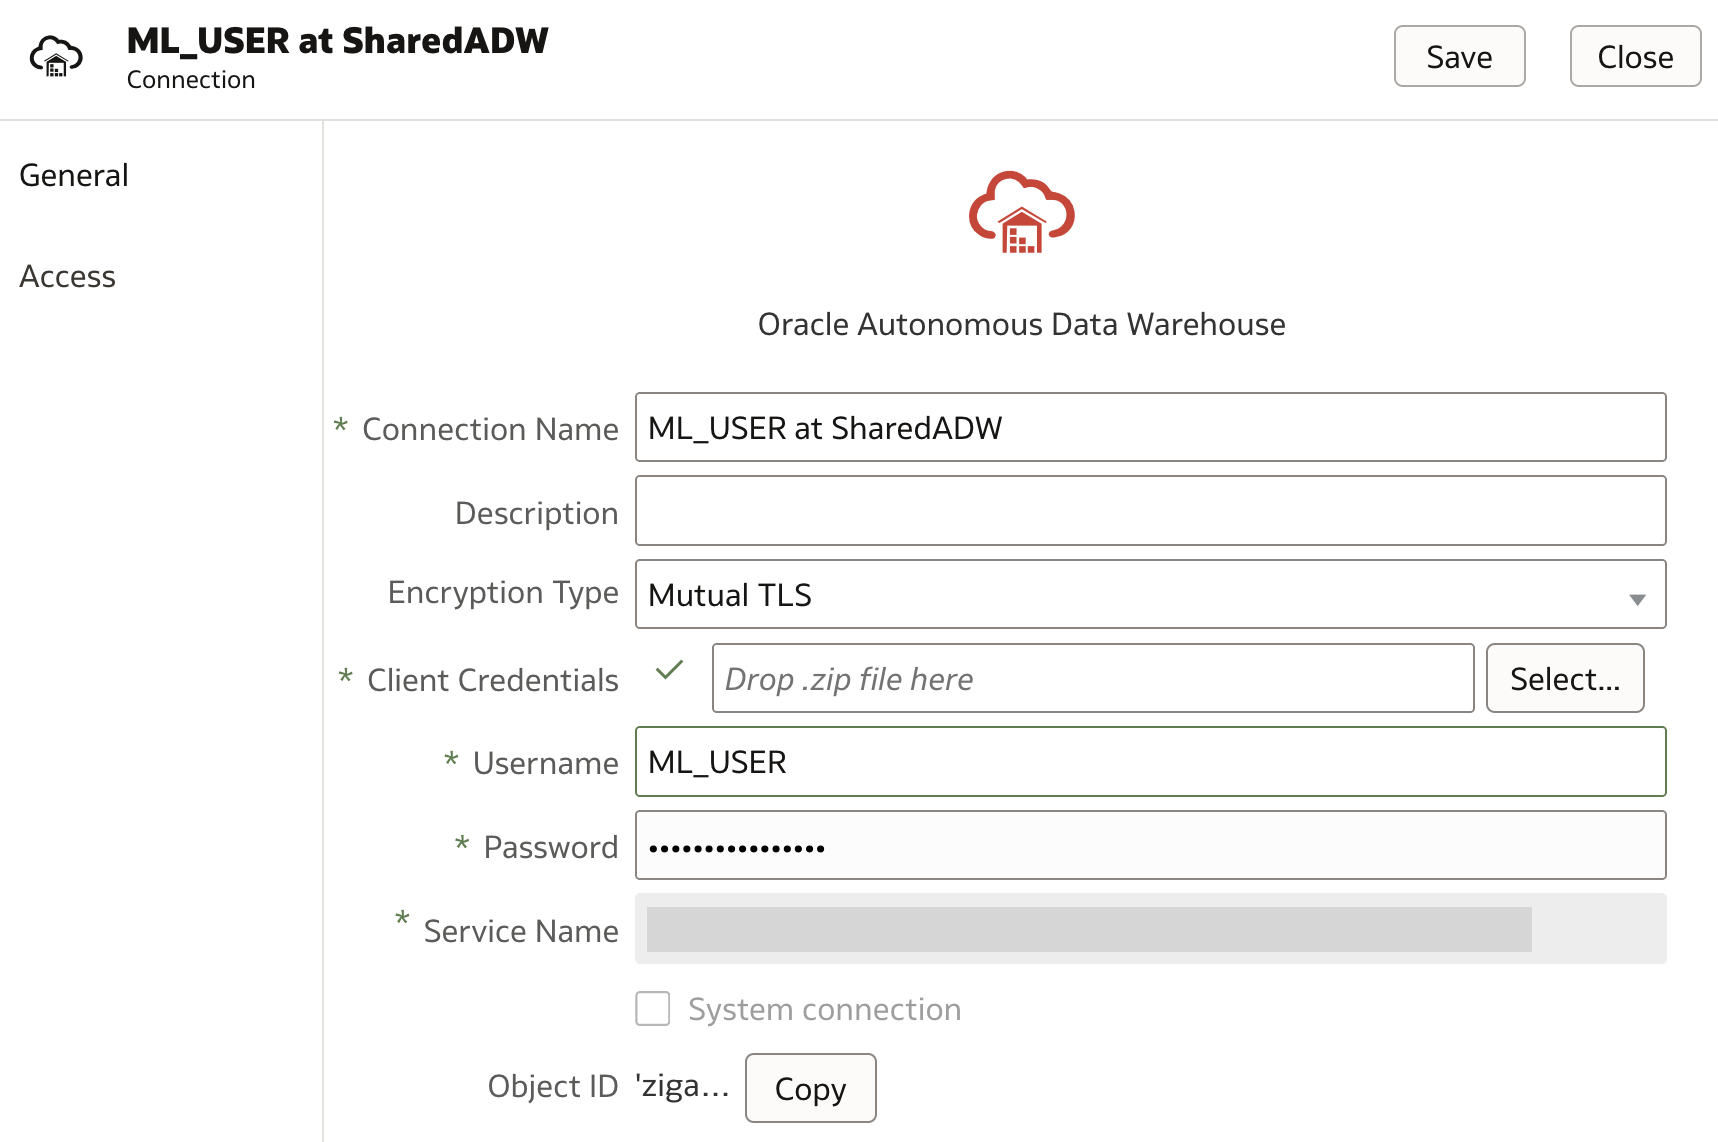 Create connection using database user with OML_Developer role